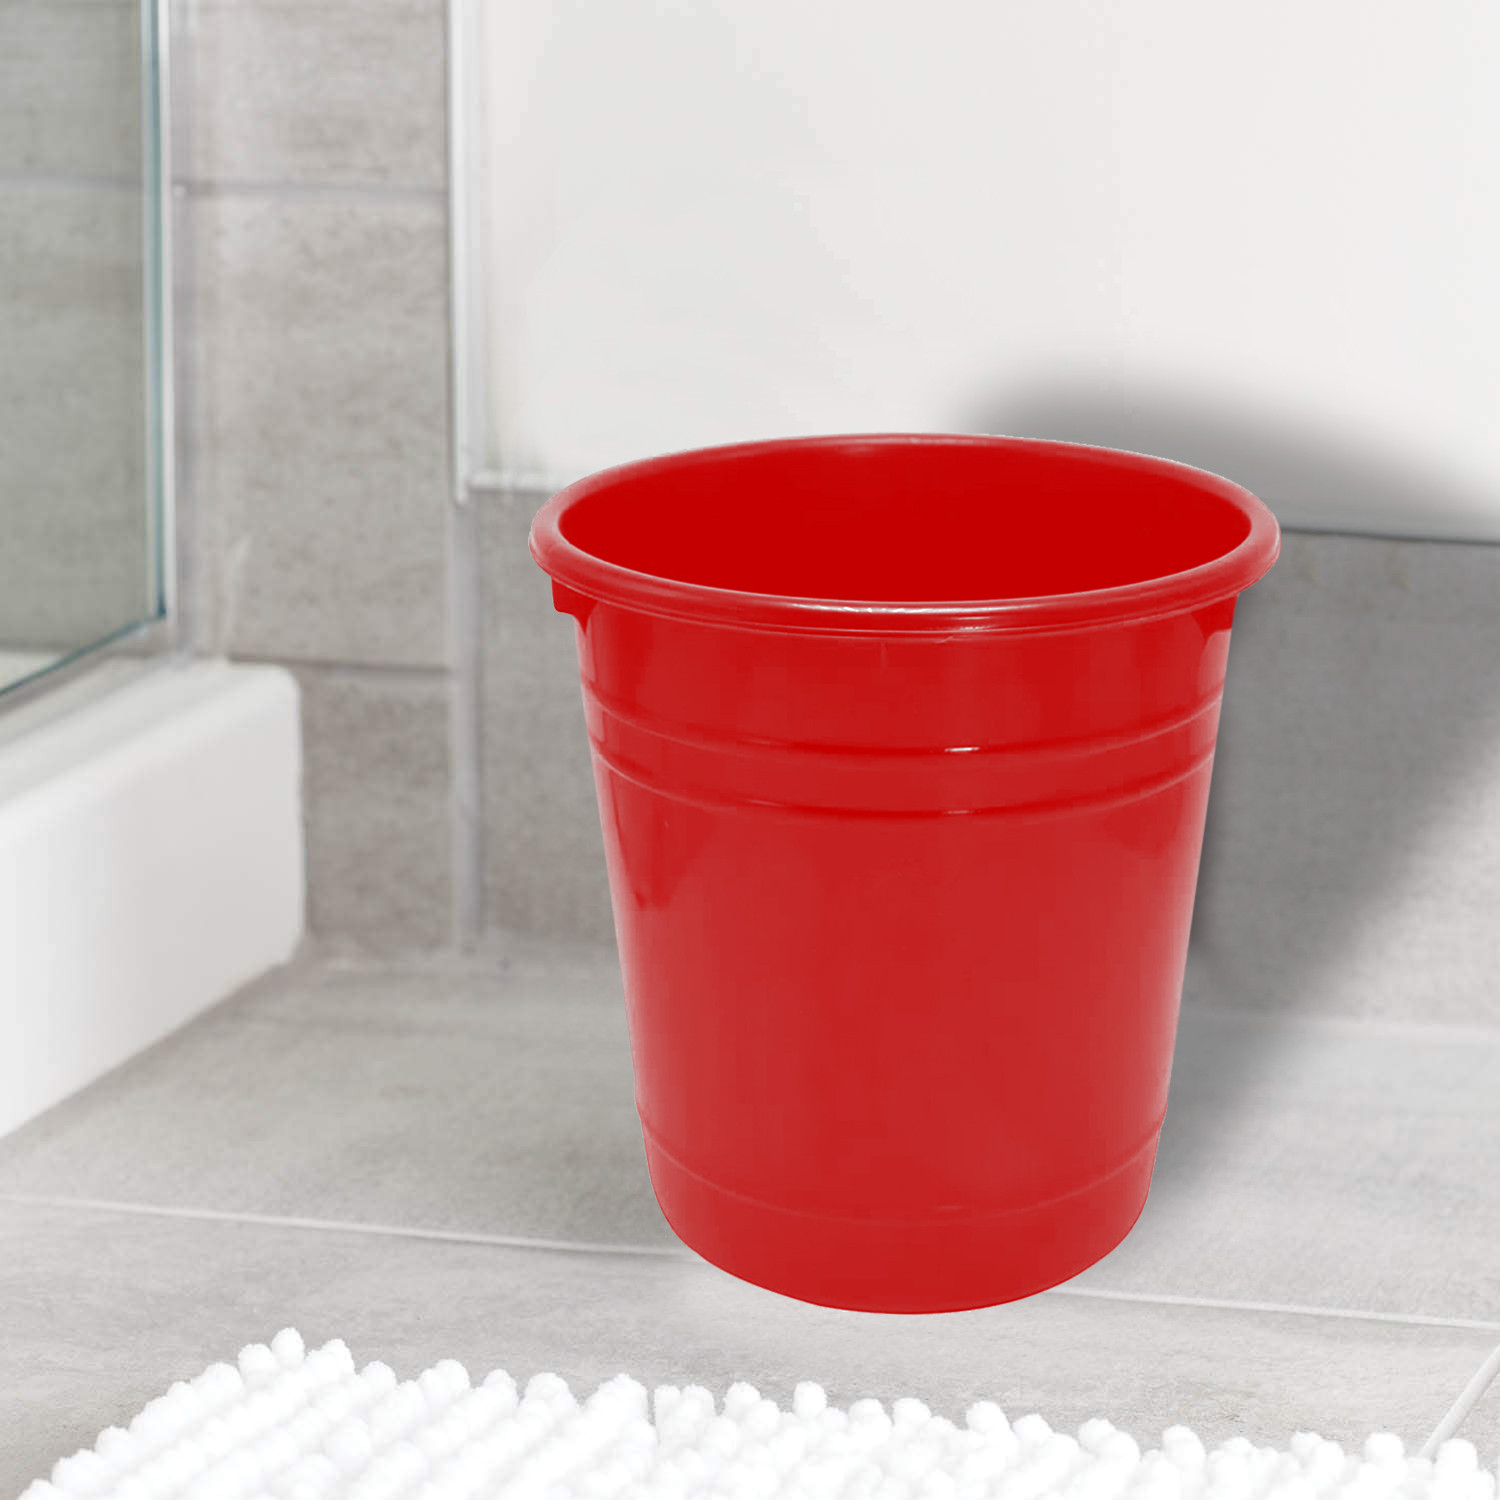 Kuber Industries Plastic Dustbin|Portable Garbage Basket & Round Trash Can for Home,Kitchen,Office,College,5 Ltr.(Red)